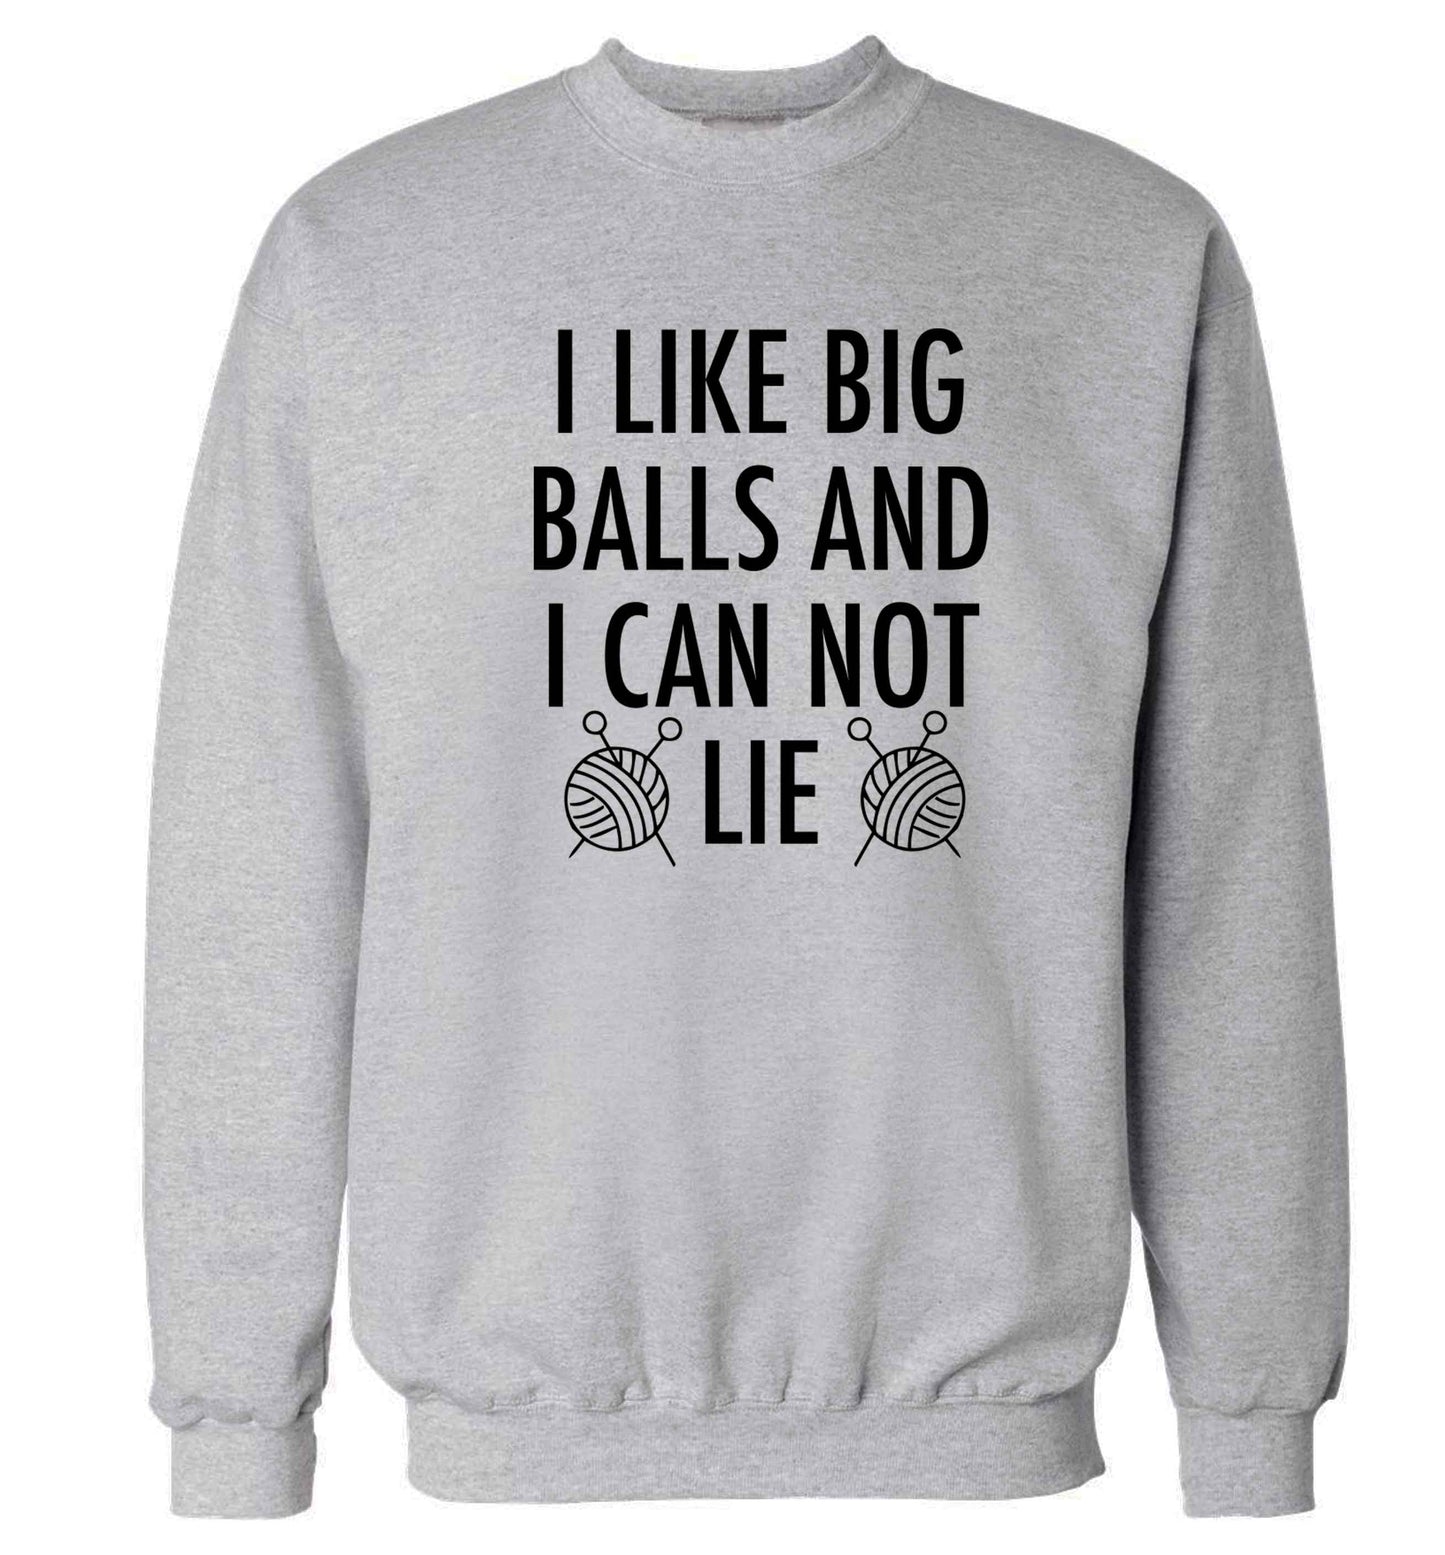 I like big balls and I can not lie Adult's unisex grey Sweater 2XL